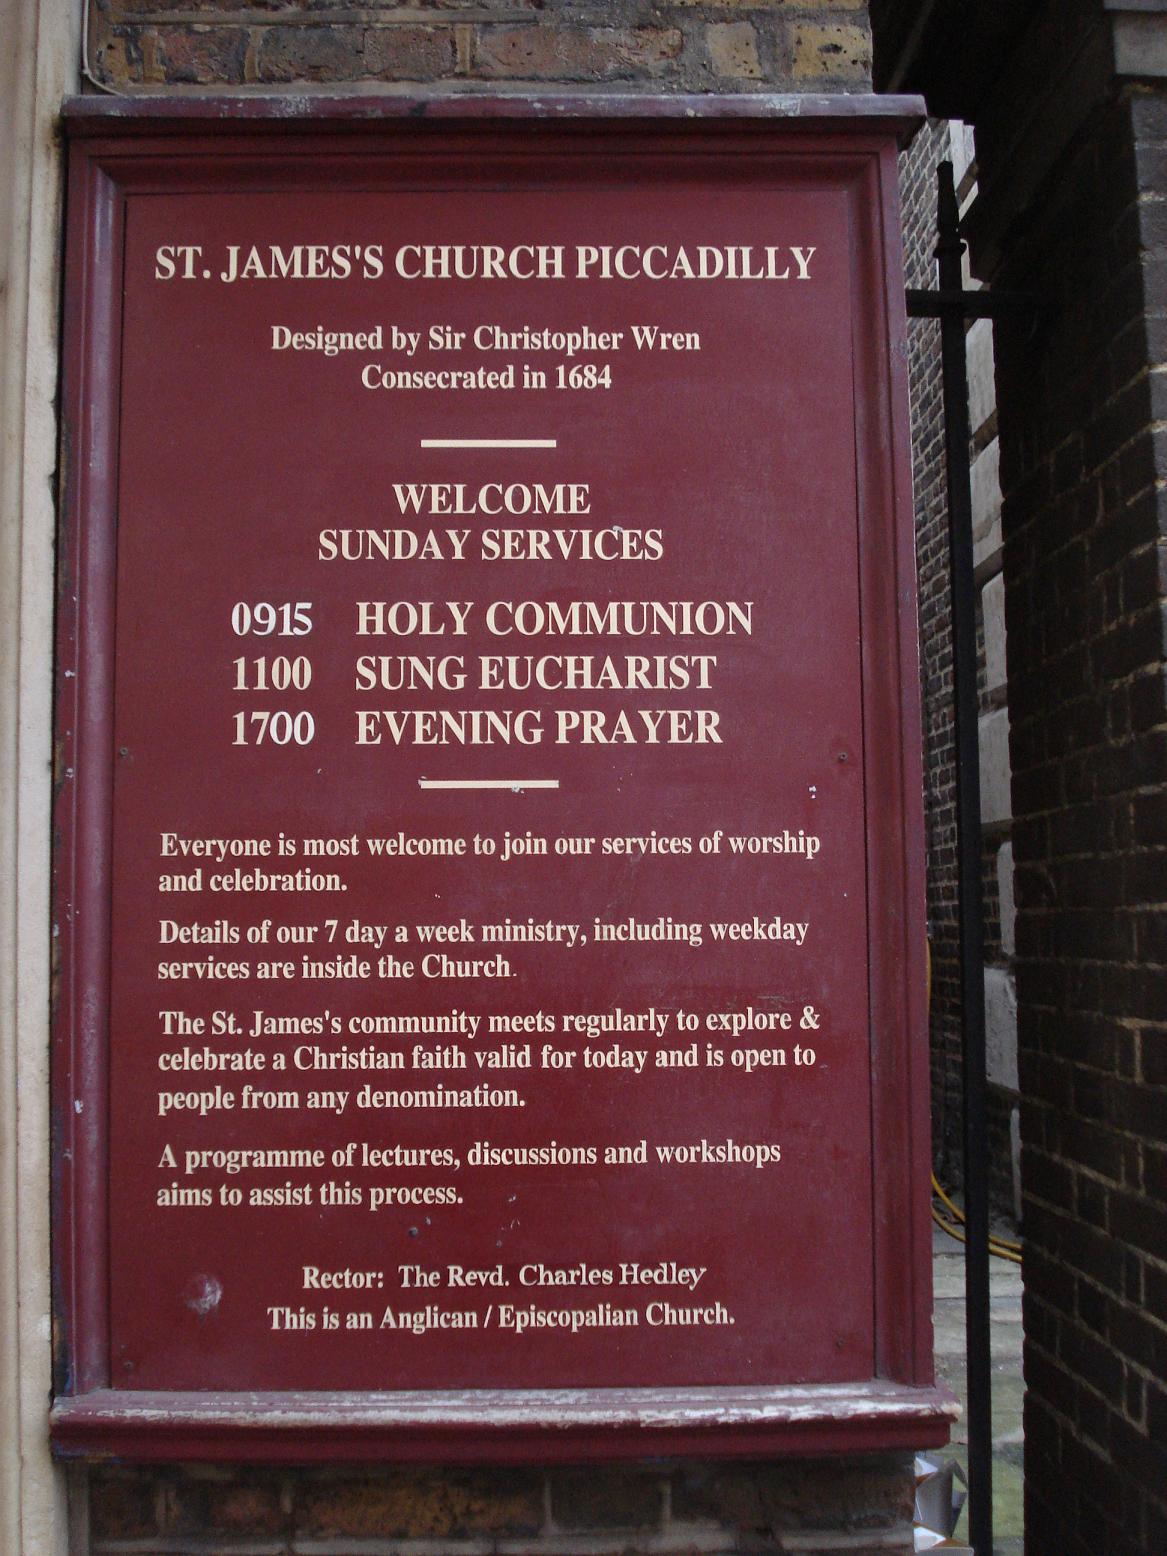 St. James's Church Piccadilly, Winchester, London, England